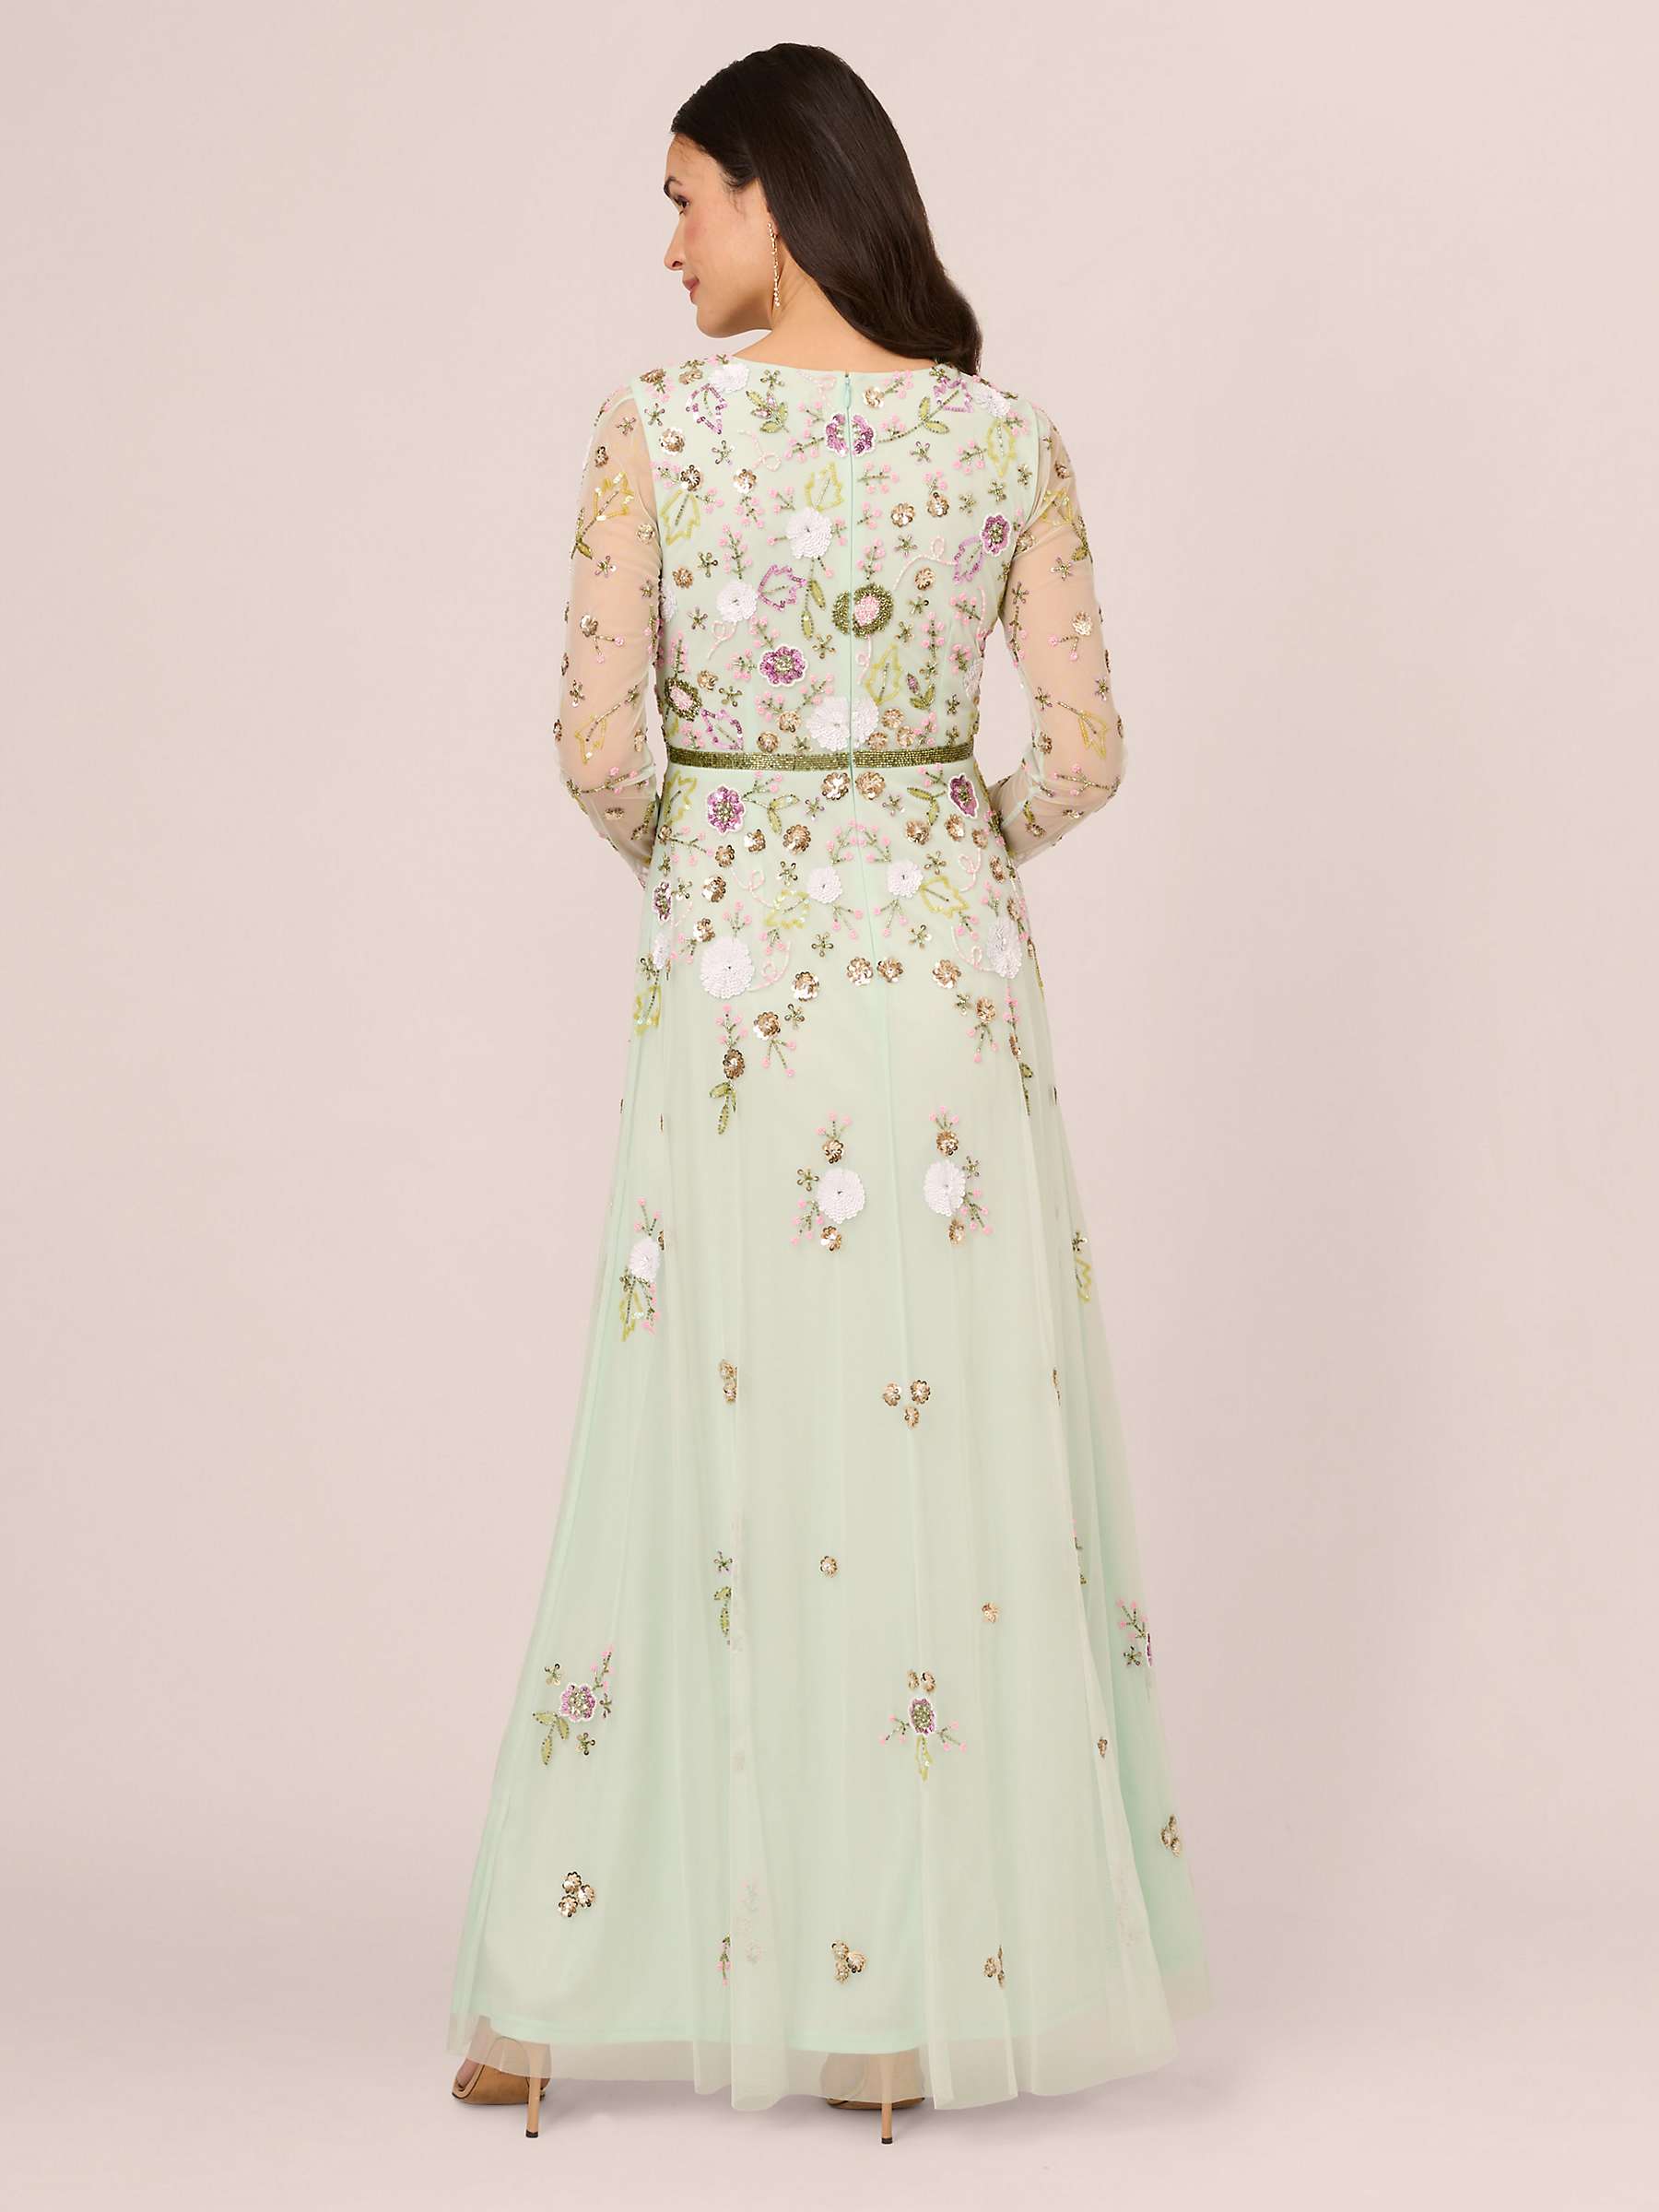 Buy Adrianna Papell Long Sleeve Beaded Maxi Dress, Mint Glass Online at johnlewis.com